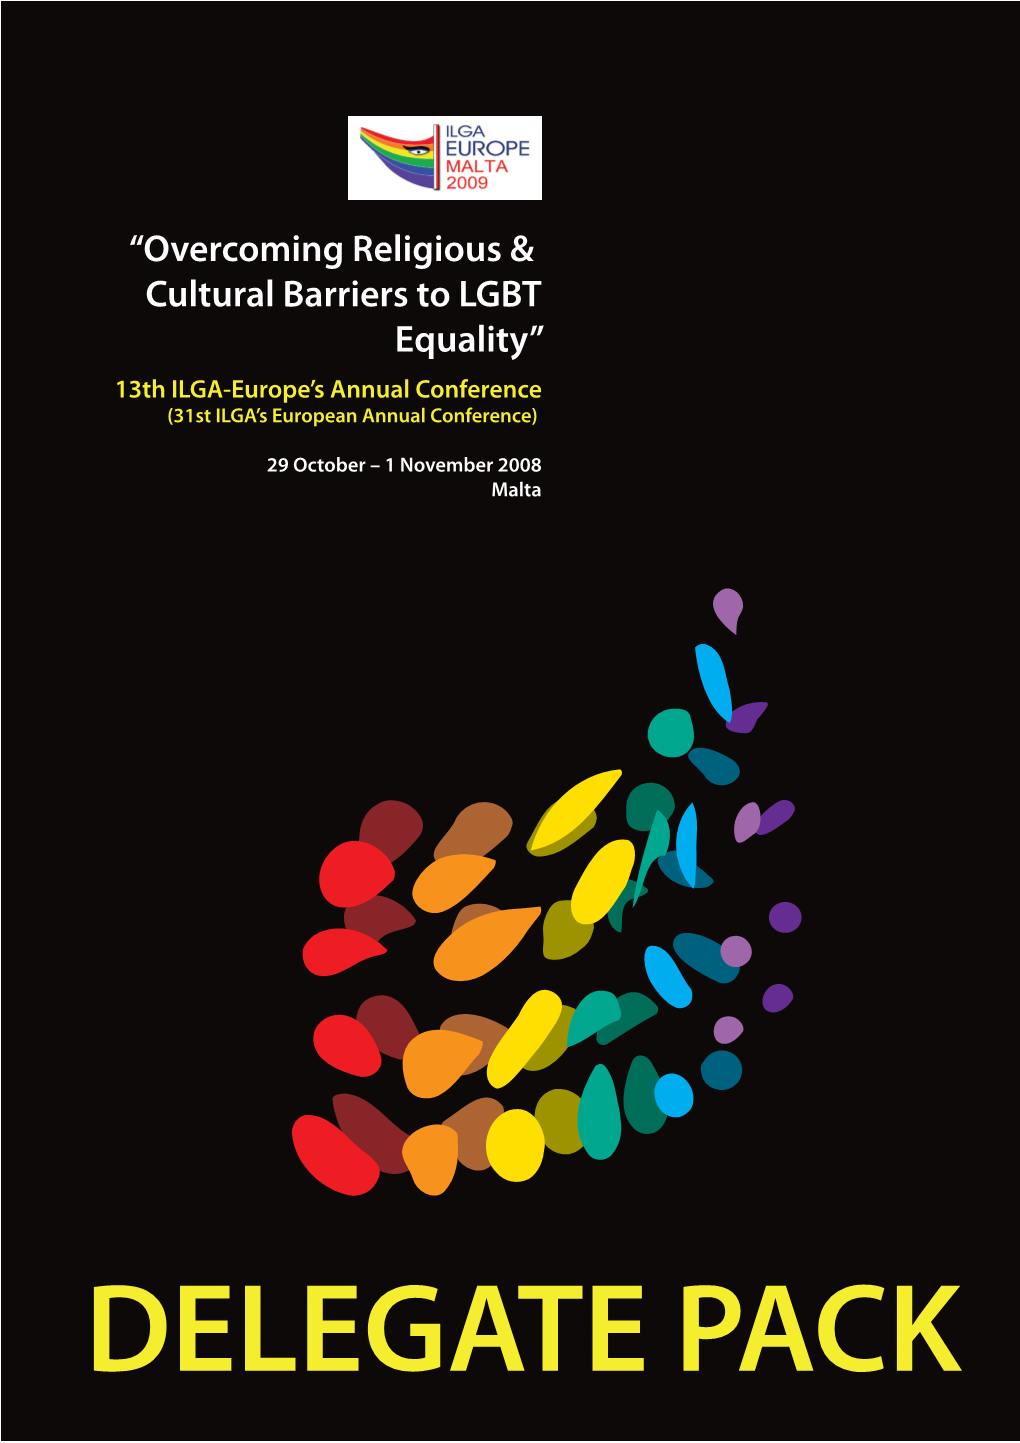 “Overcoming Religious & Cultural Barriers to LGBT Equality”